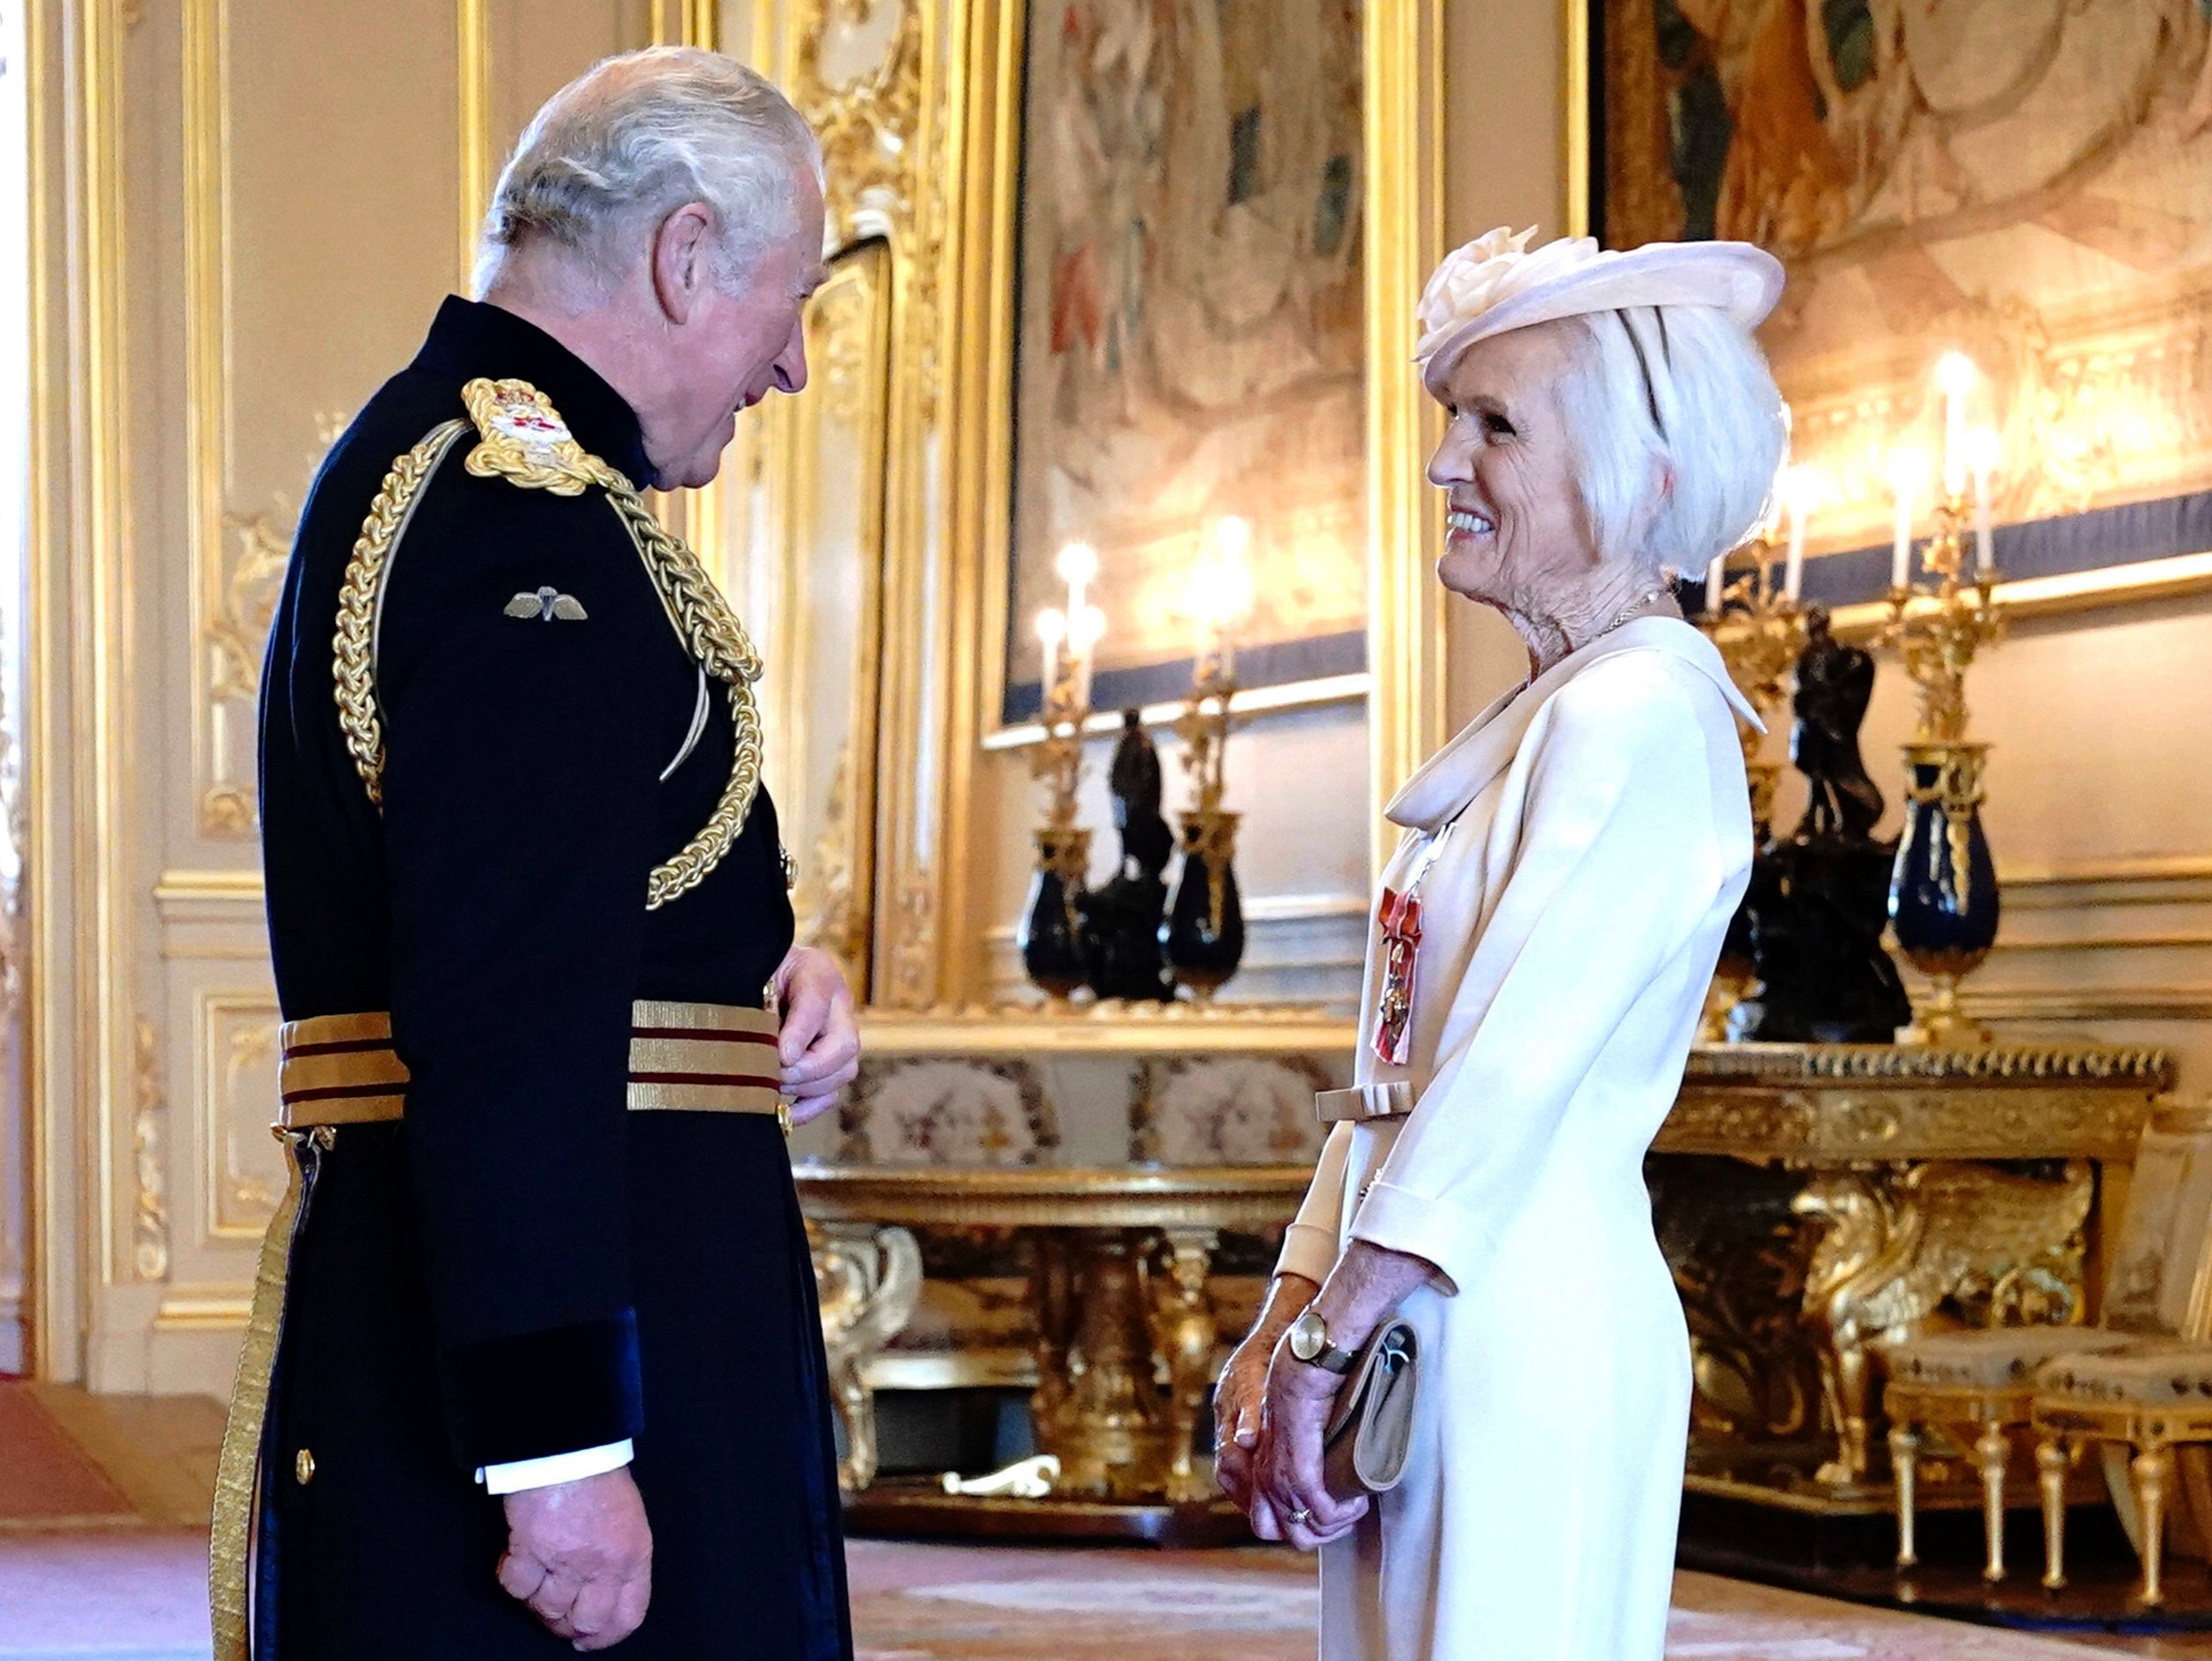 Mary Berry is made a Dame Commander by Prince Charles